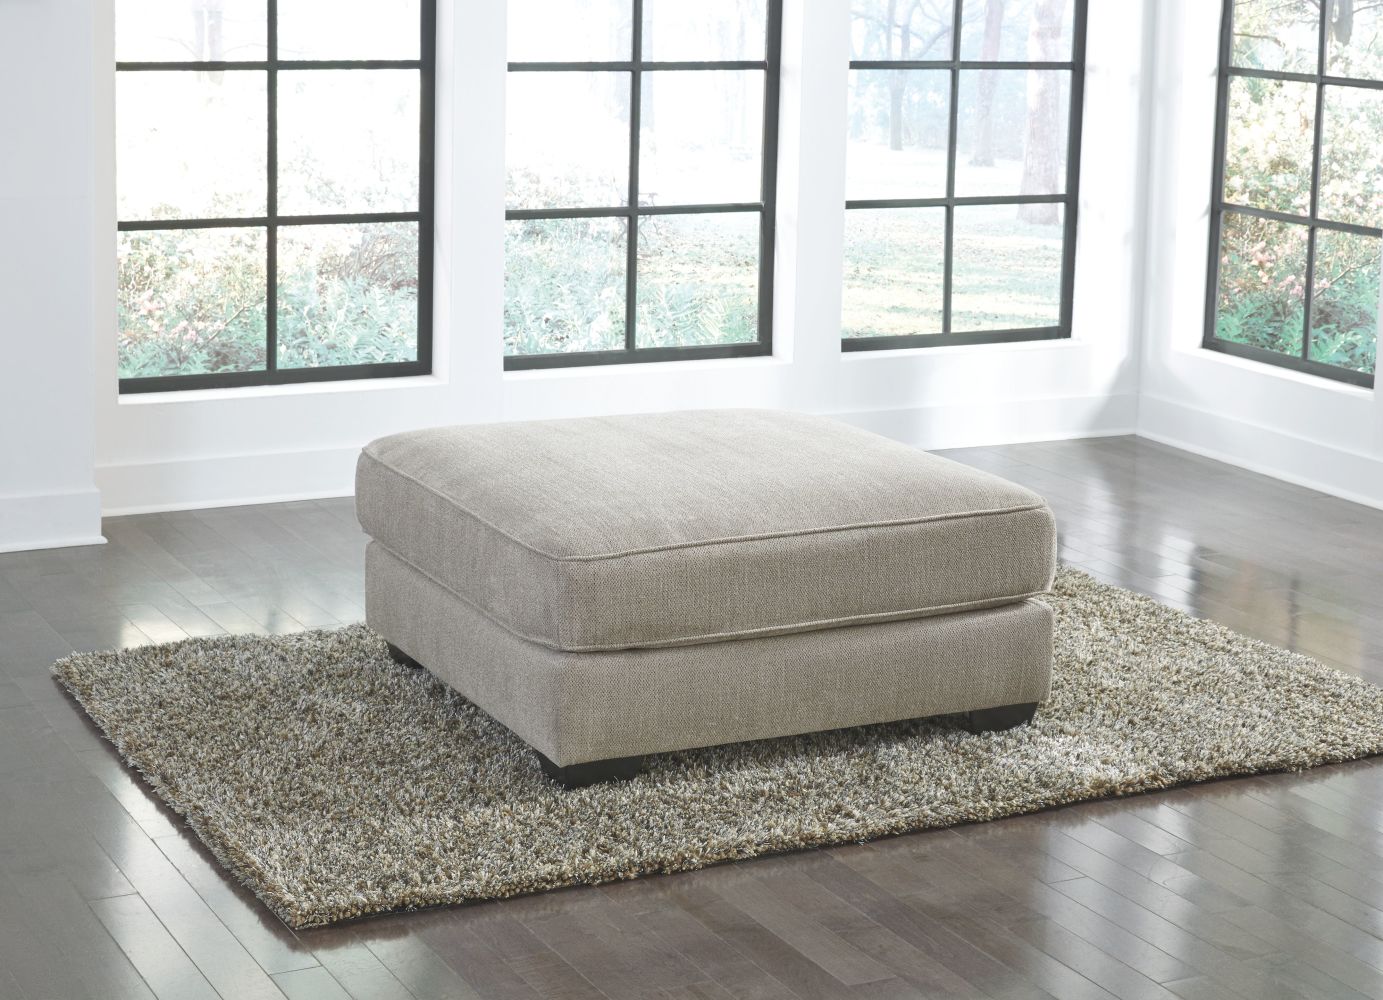 Ardsley – Pewter – Oversized Accent Ottoman 3950408